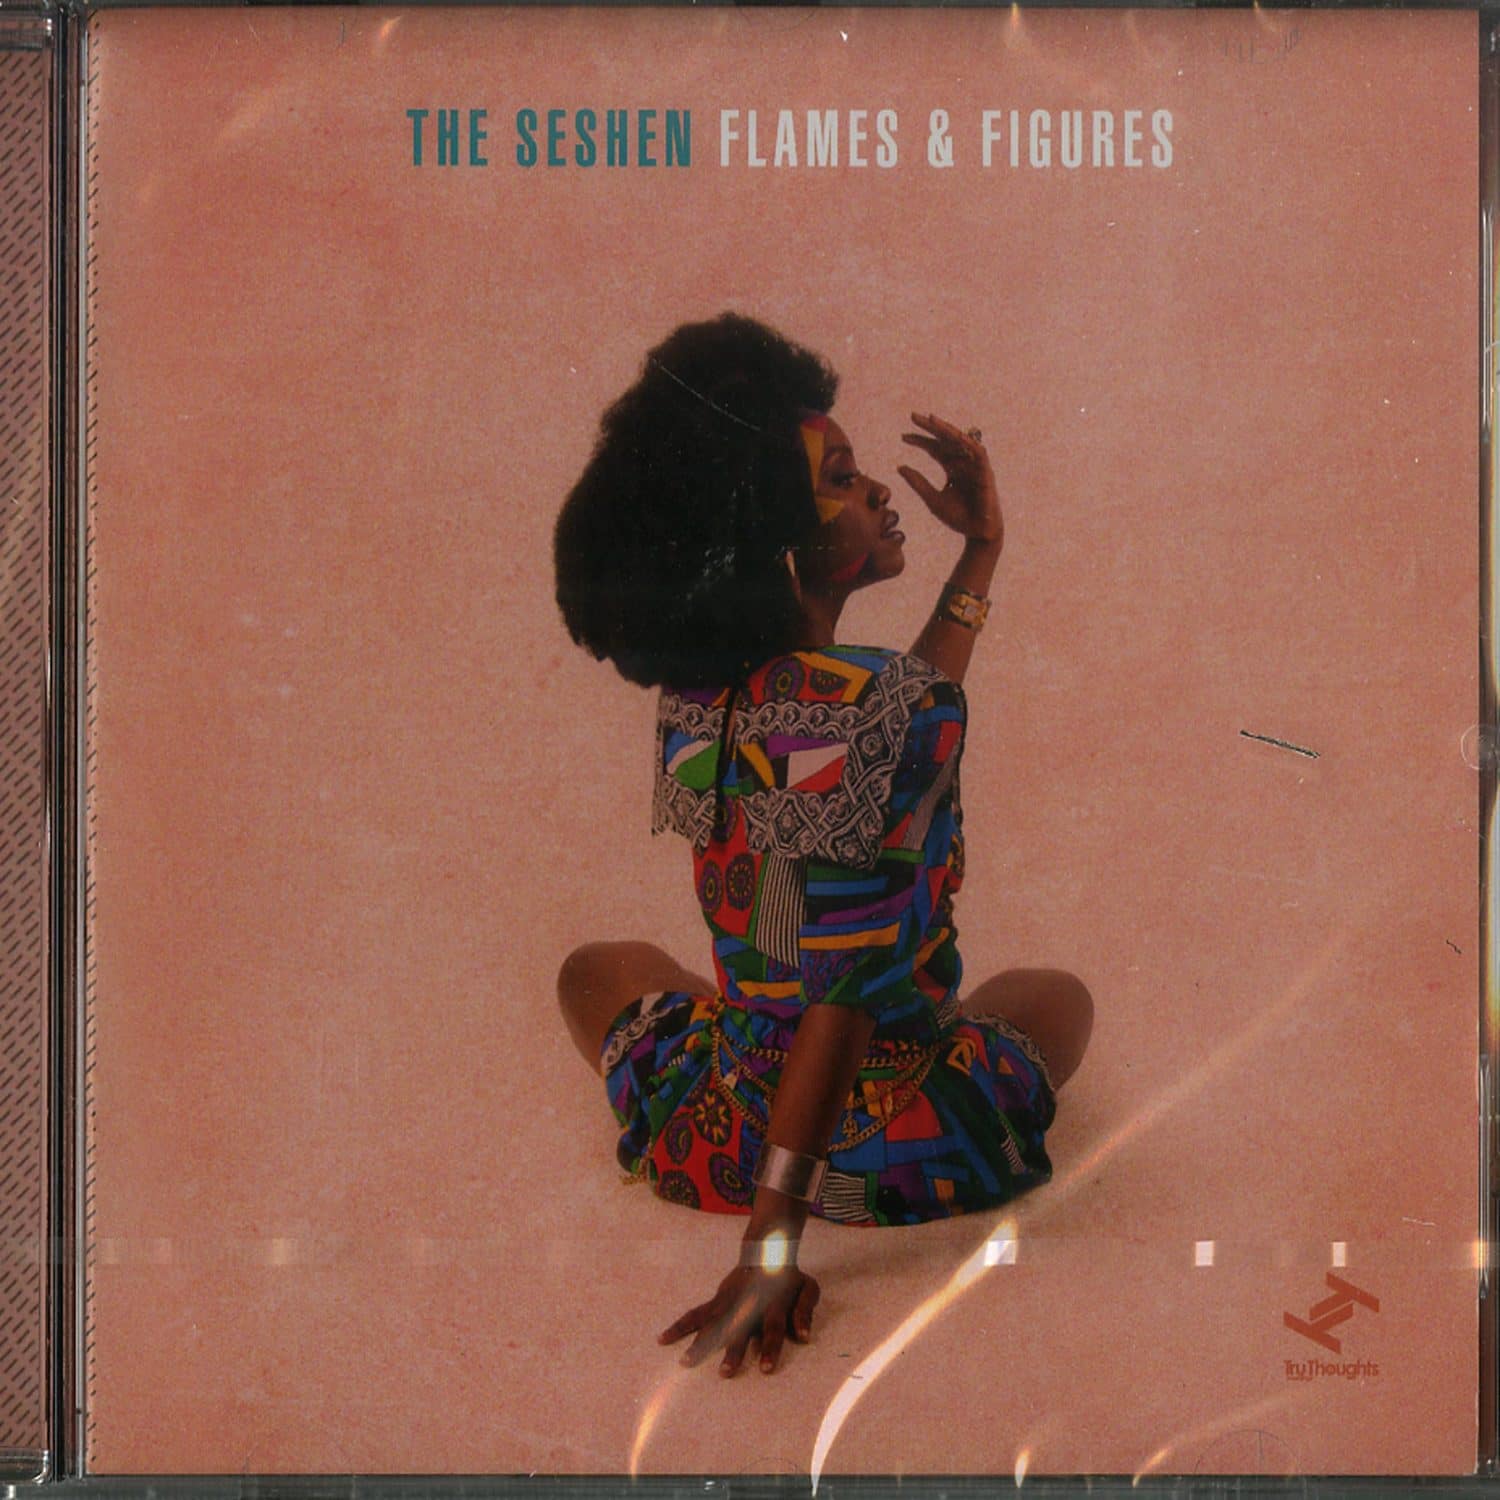 The Seshen - FLAMES & FIGURES 